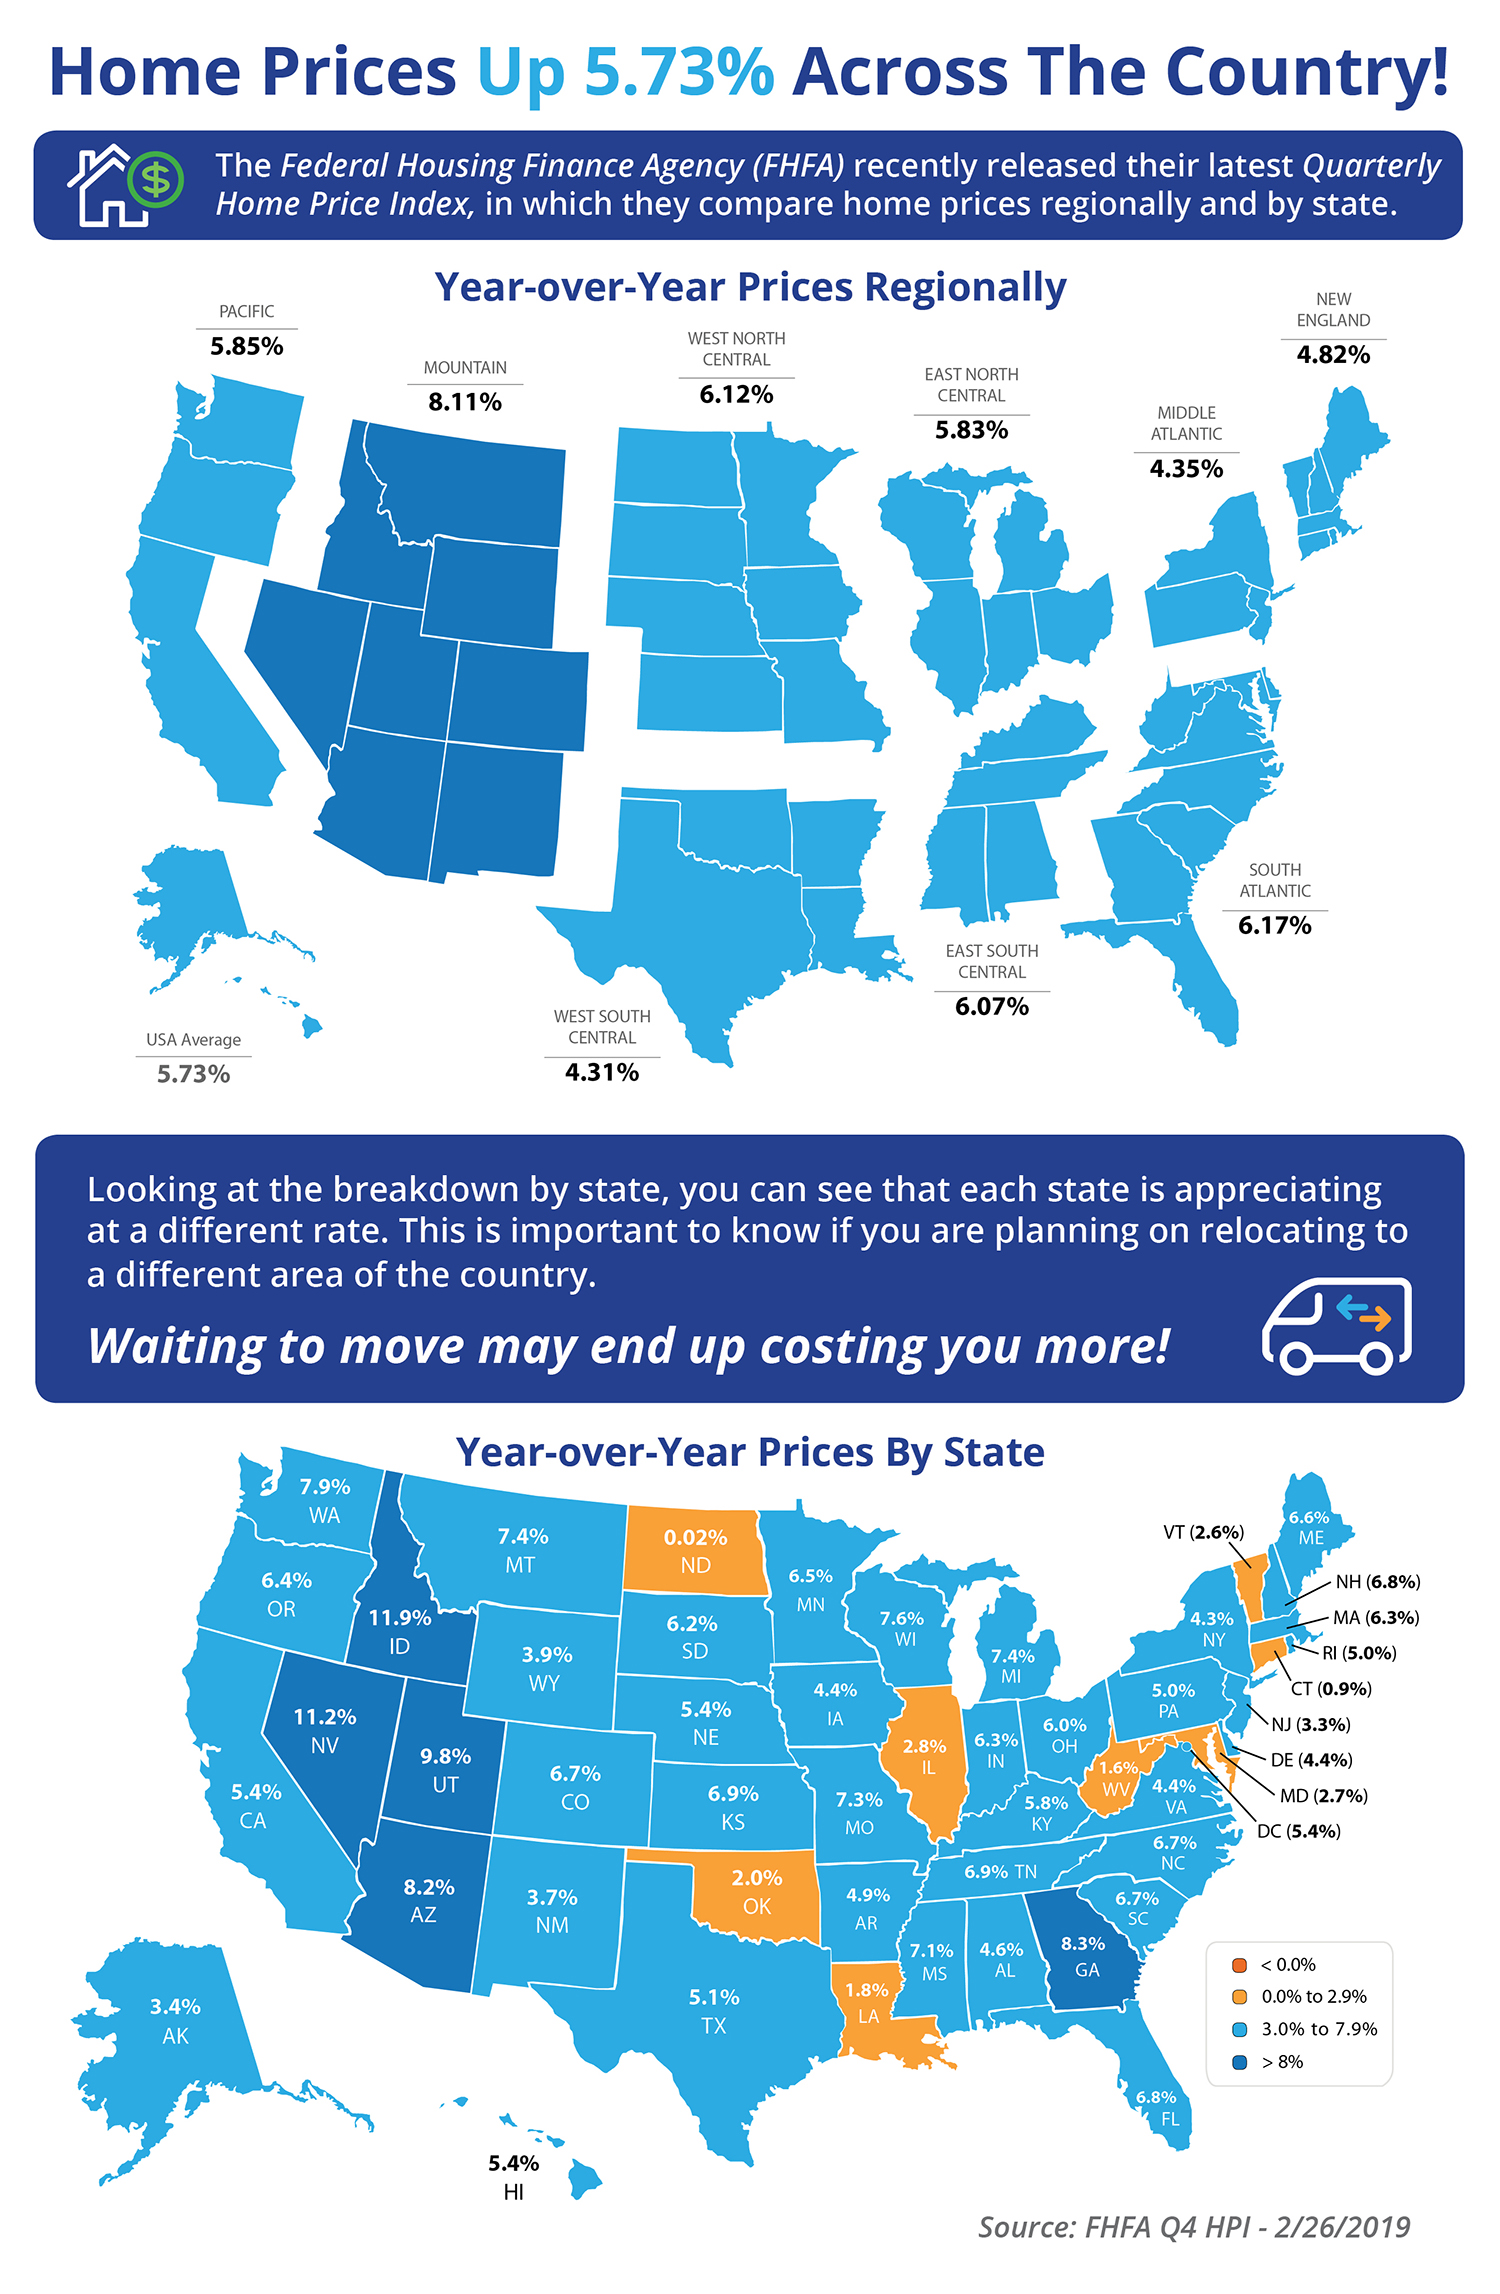 Home Prices Up 5.73% Across the Country! [INFOGRAPHIC] | MyKCM